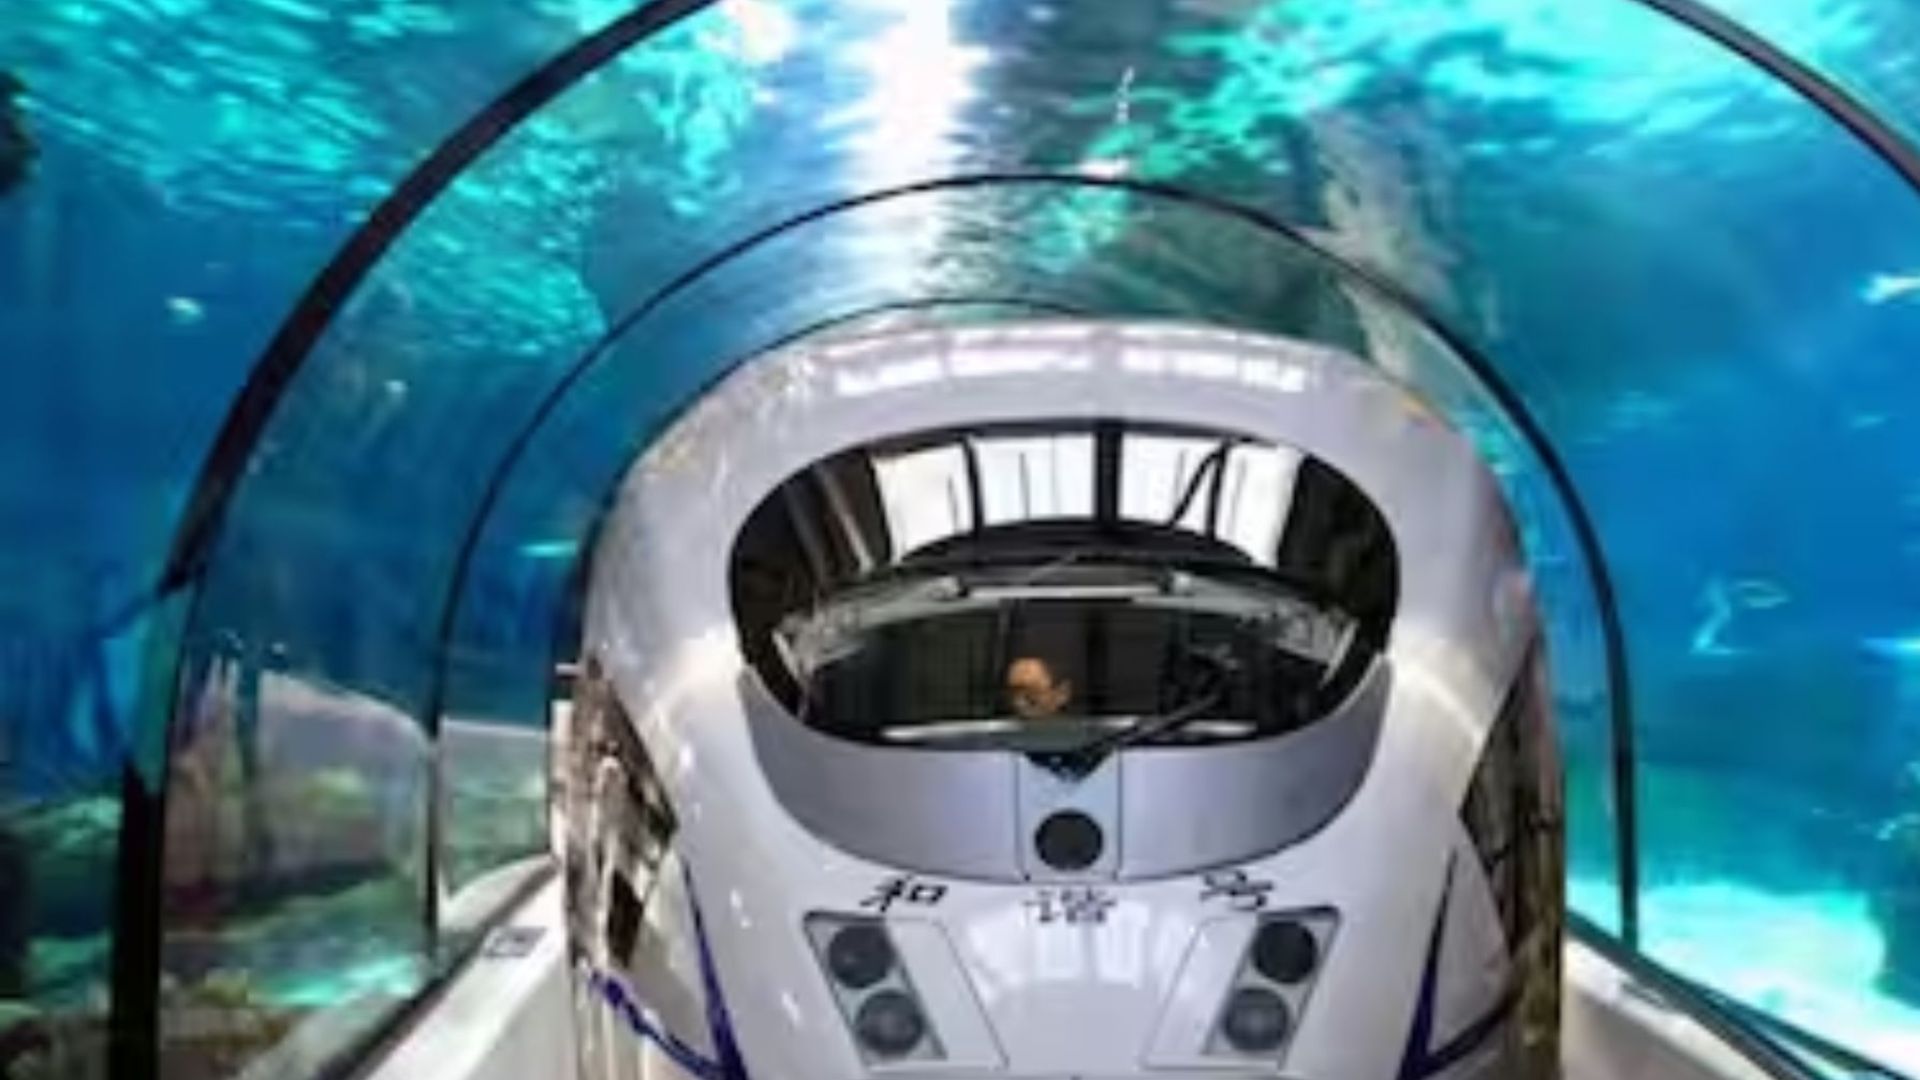 Kolkata Launches India’s First Underwater Metro Service for Public Use